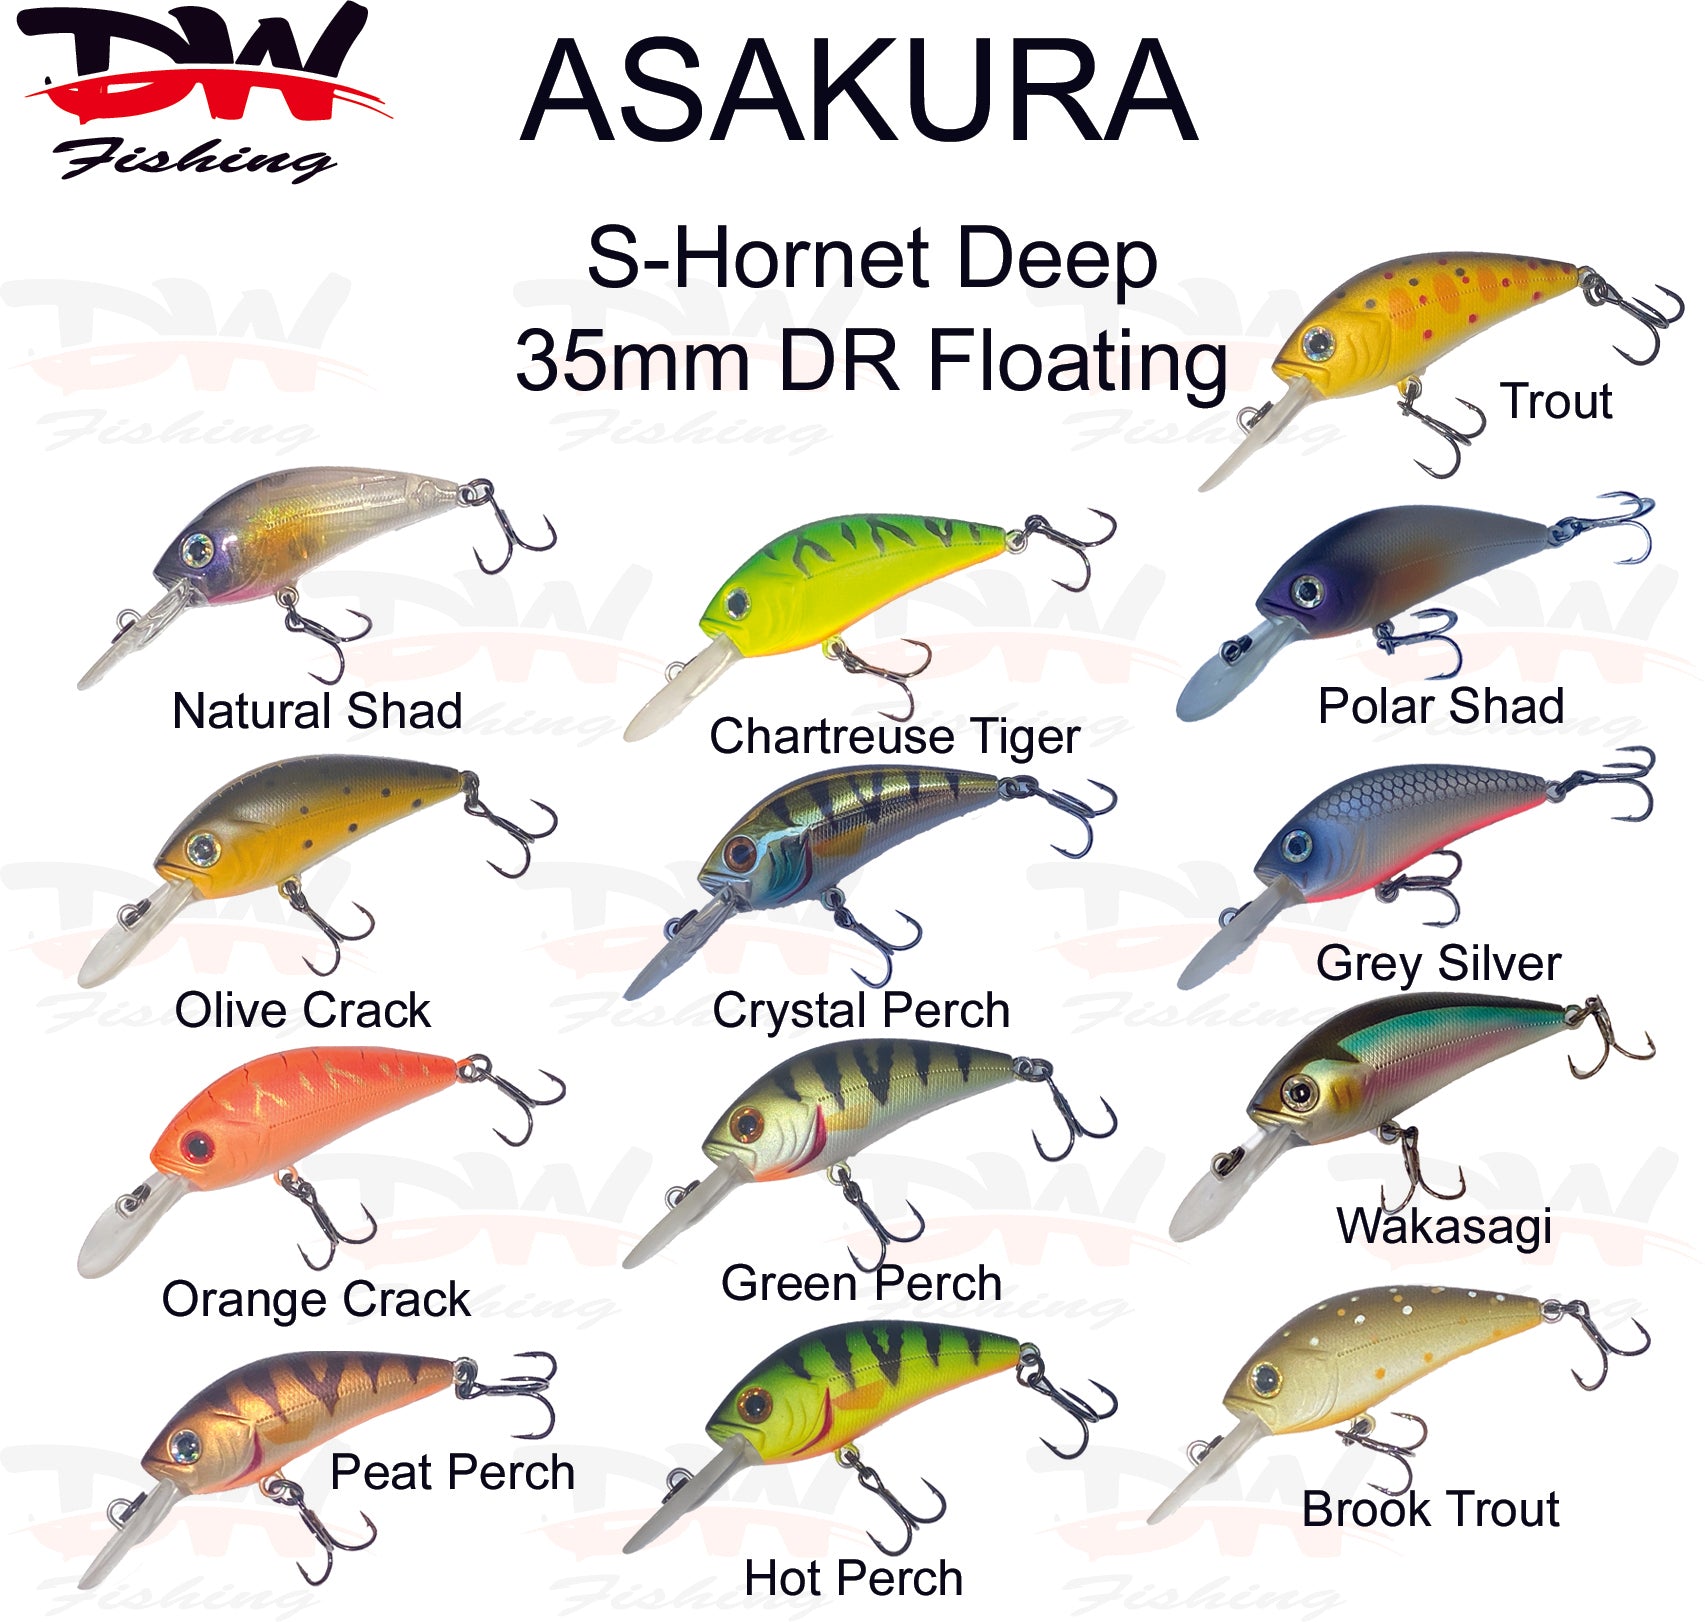 Asakura S-Hornet 3DR-Floating lure group of colours available